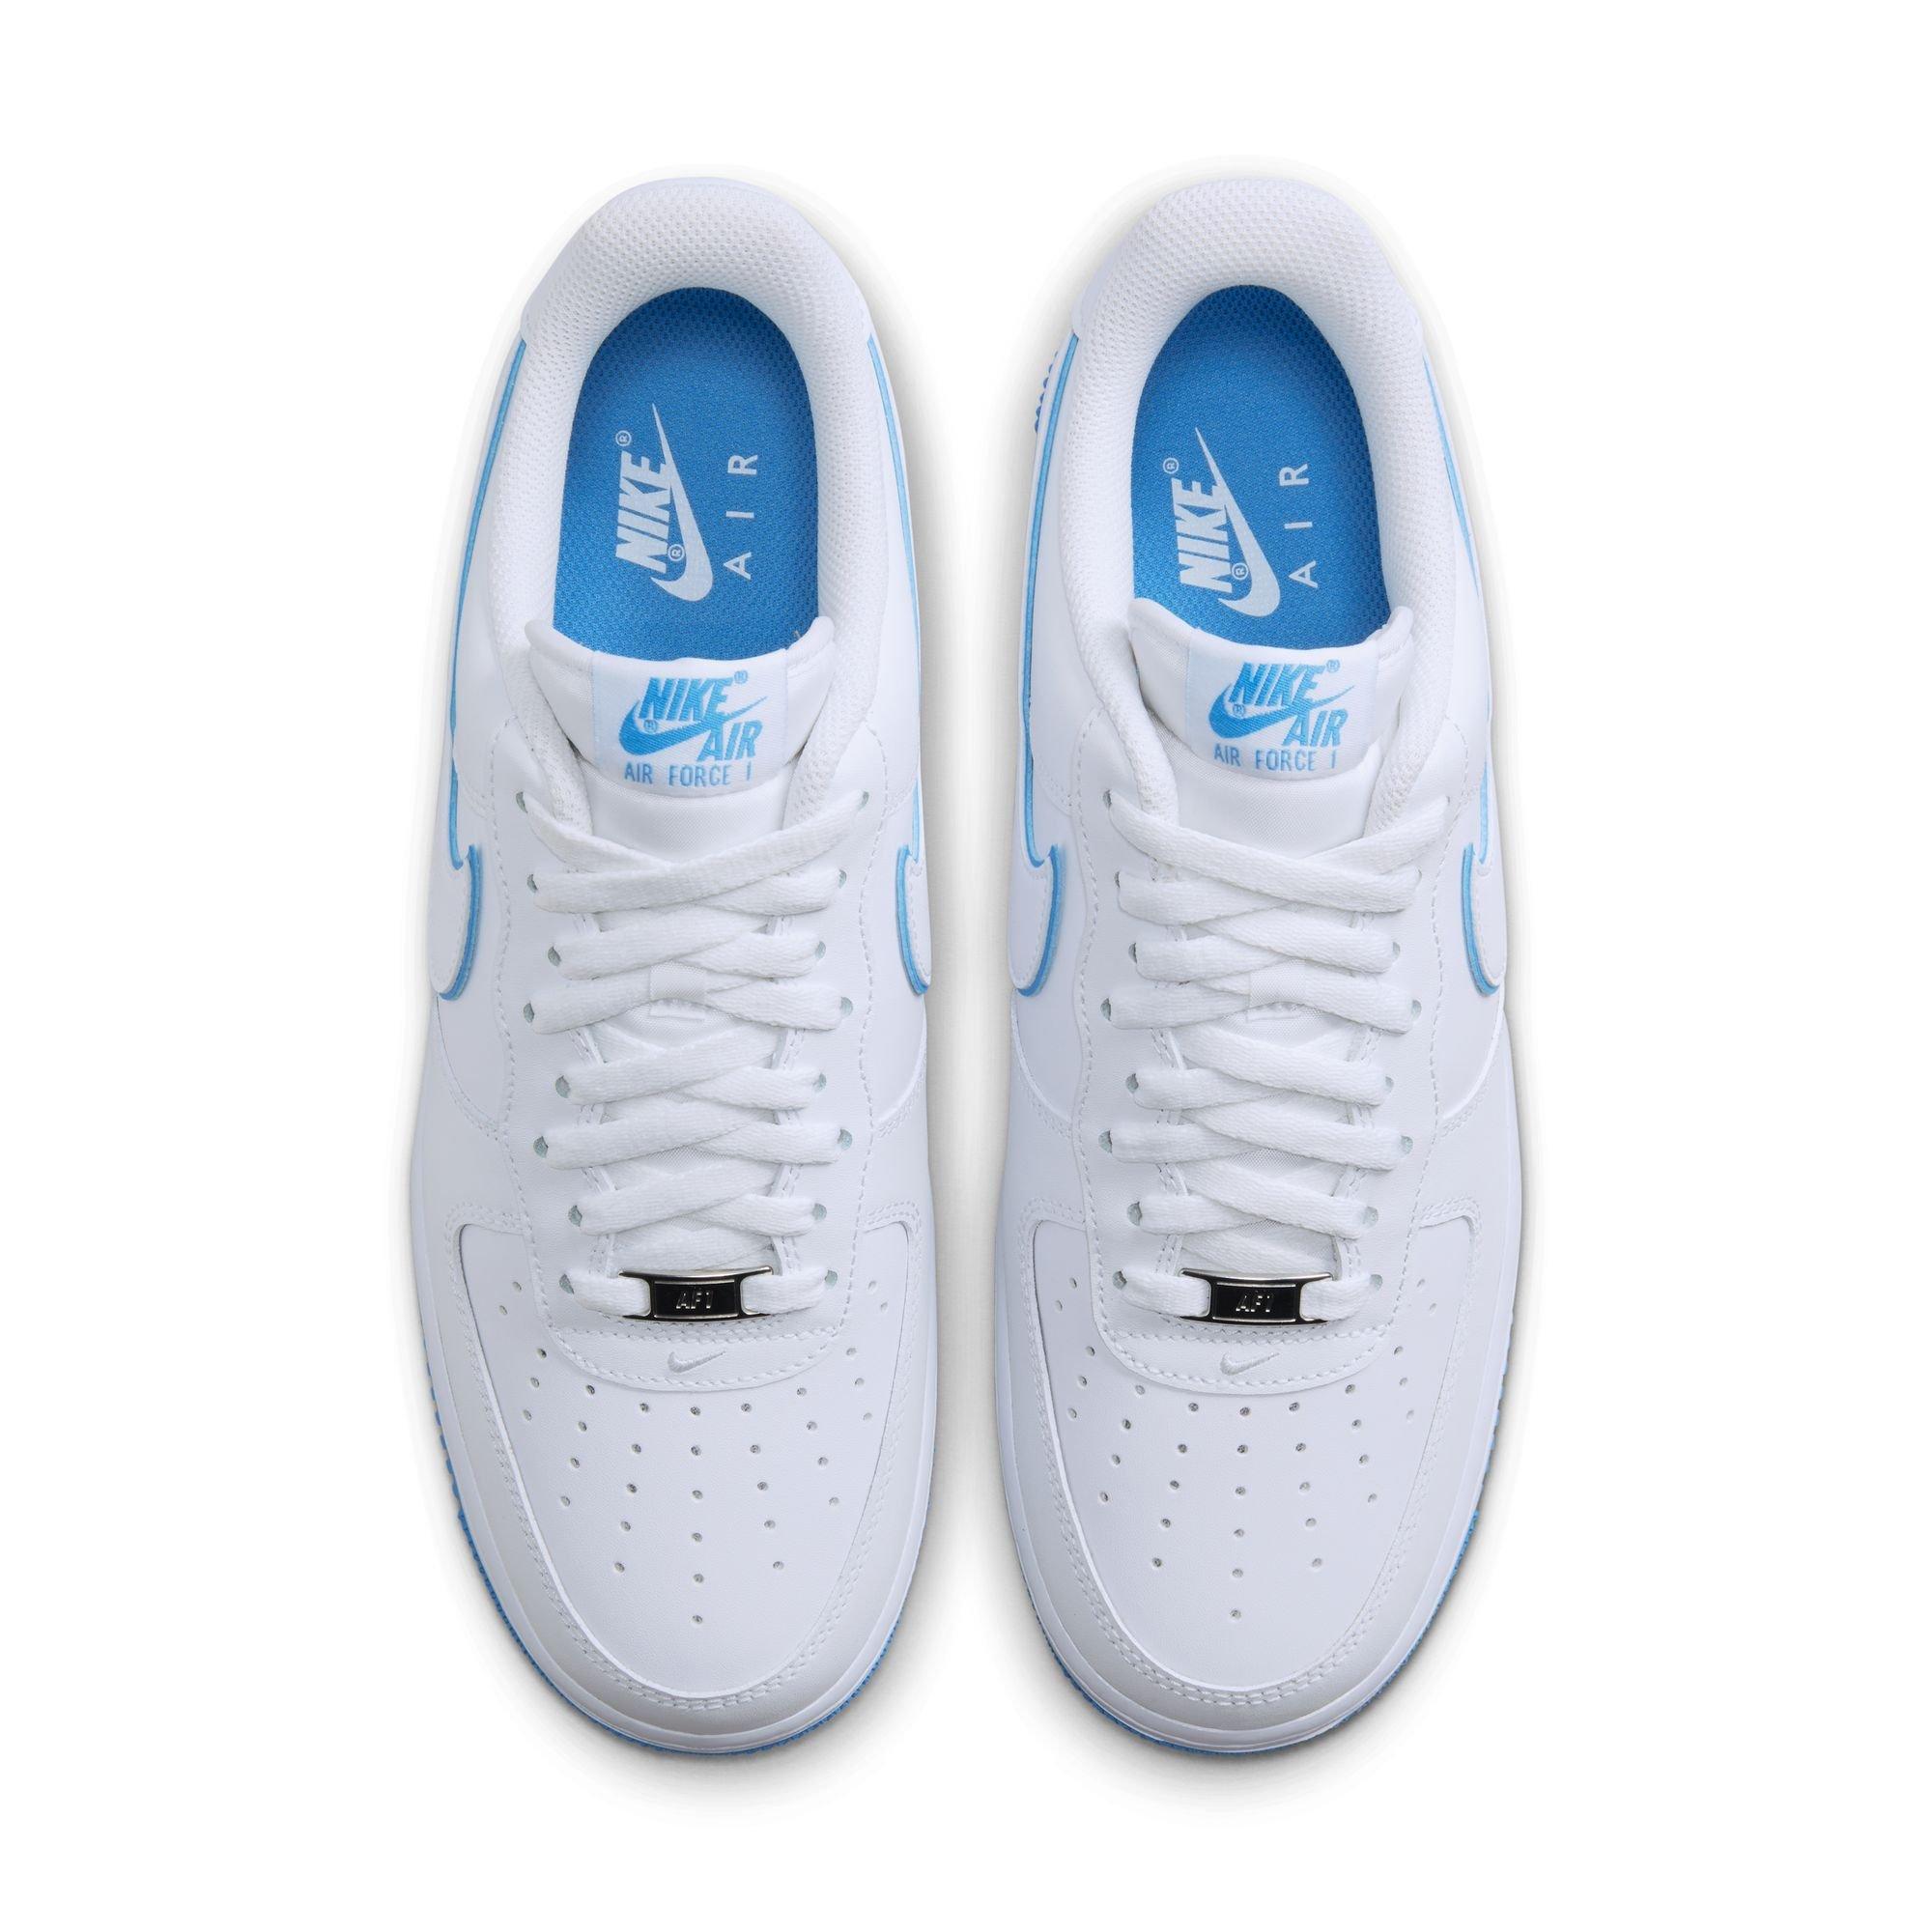 Nike Air Force 1 '07 University Blue Mens Lifestyle Shoes White